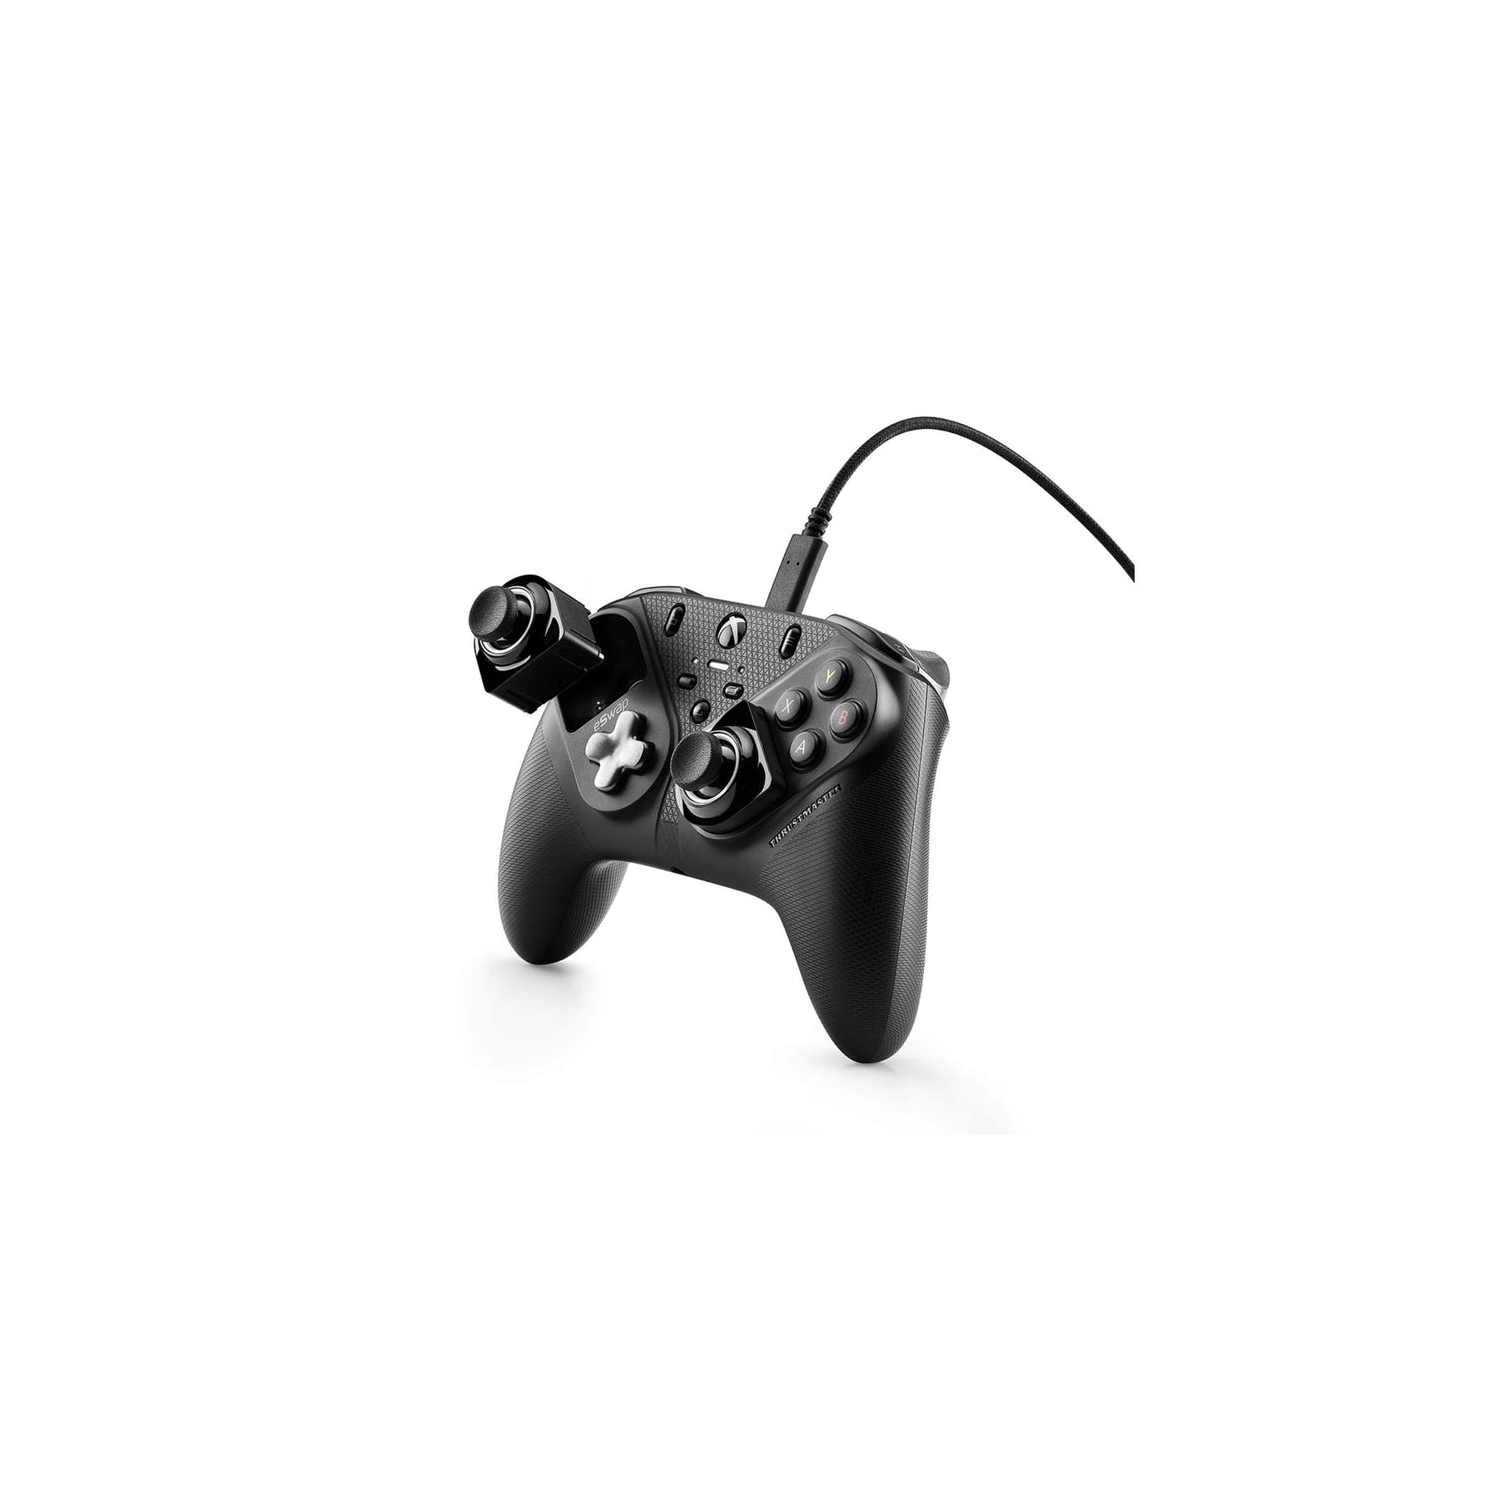 Refurbished (Good) - Thrustmaster eSwap S Pro Wired Controller for Xbox Series X|S / Xbox One / PC - Black